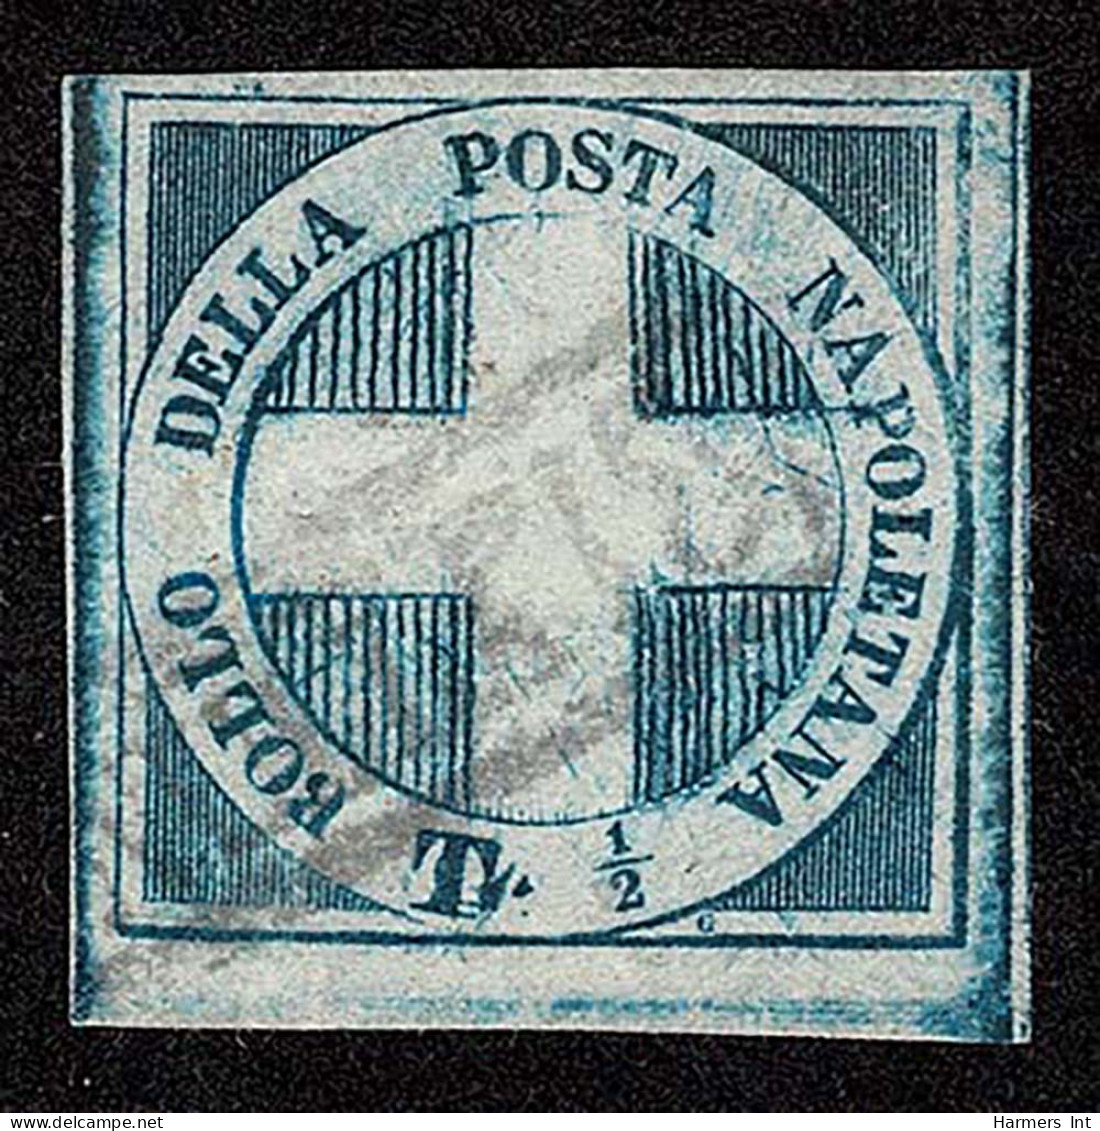 Lot # 855 Italian States, Two Sicilies: 1860 1/2t Deep Blue "The Famous Naples Savoy Cross" - Sicily